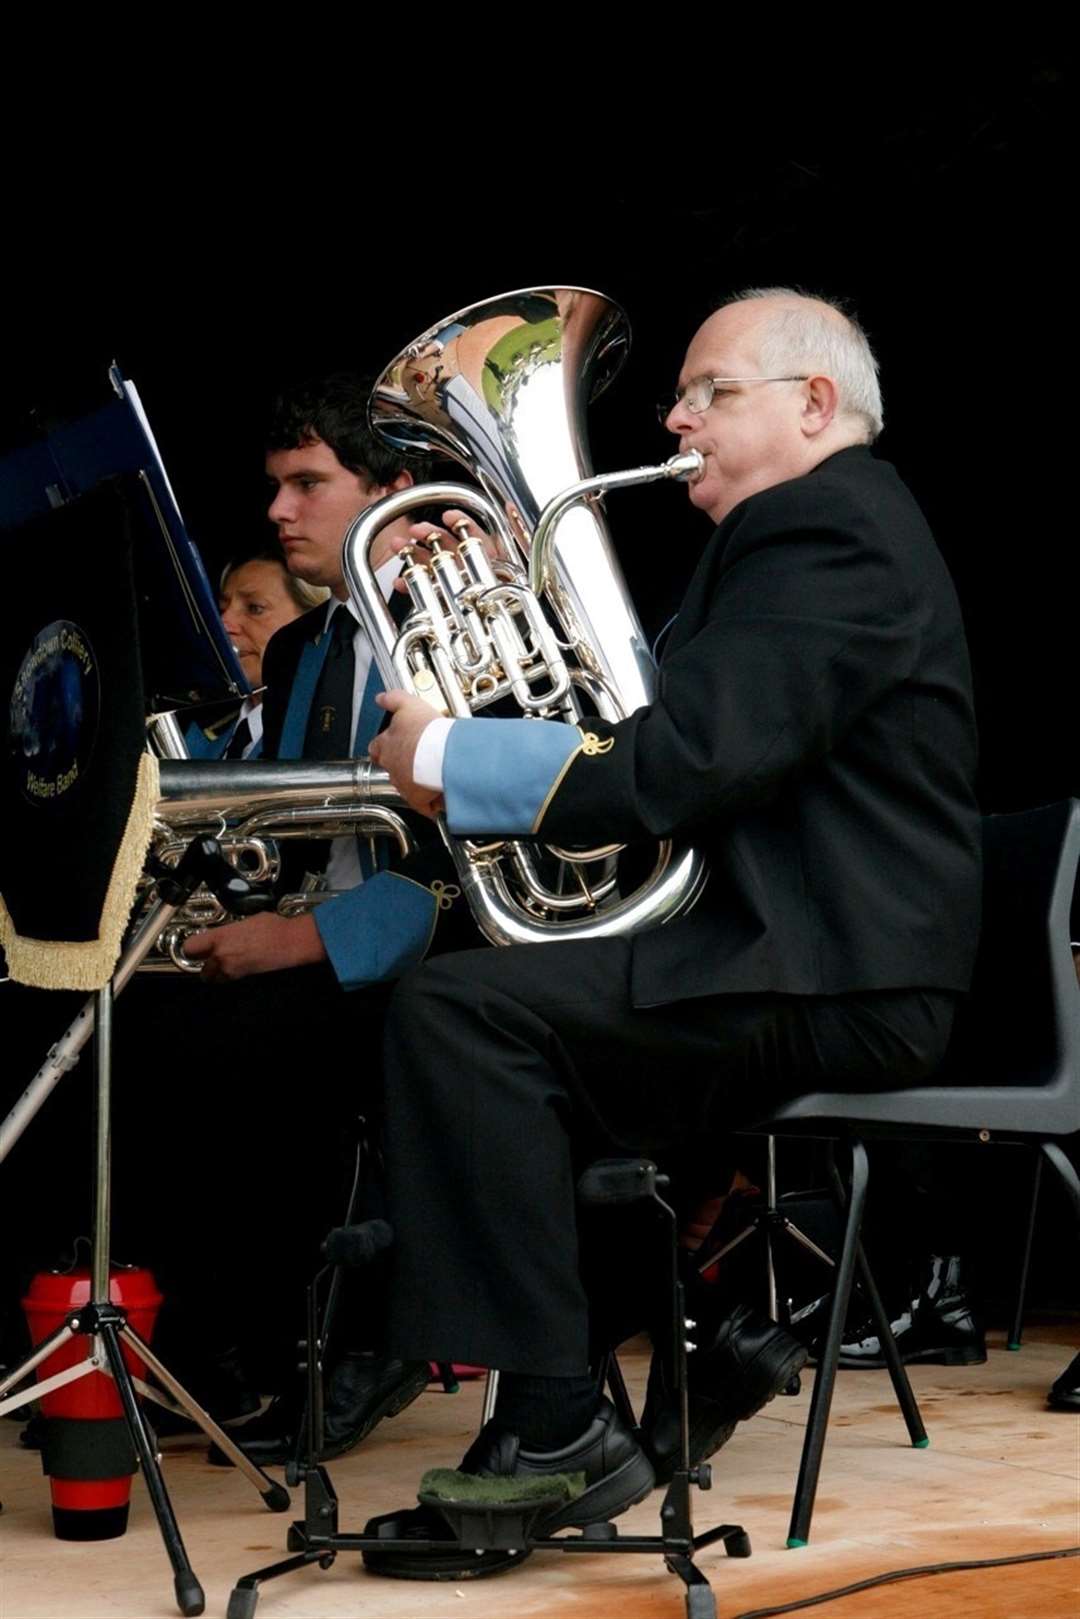 Brass and silver bands are an important tradition for mining communities and there bands at Monday's Kent Miners Festival